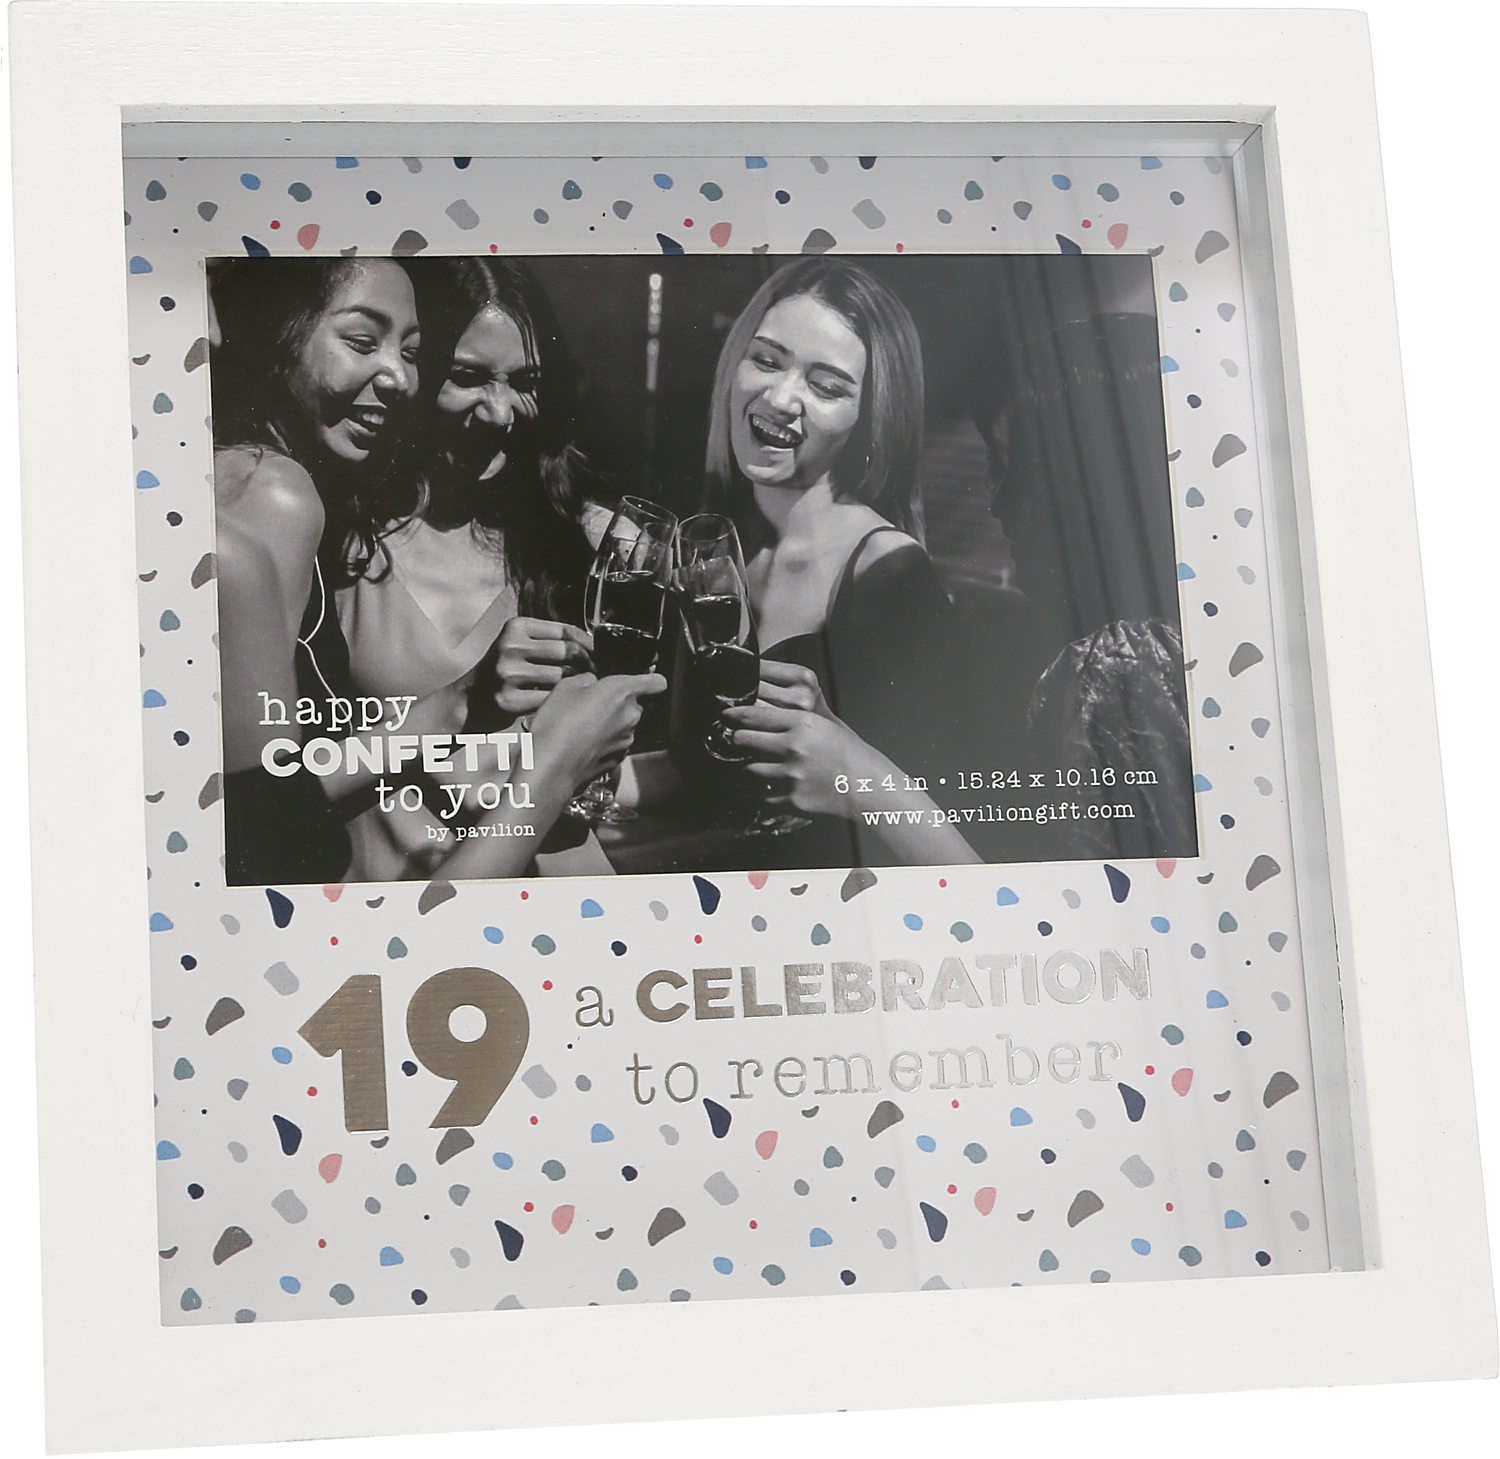 19 by Happy Confetti to You - 19 - 7.5" Shadow Box Frame
(Holds 6" x 4" Photo)